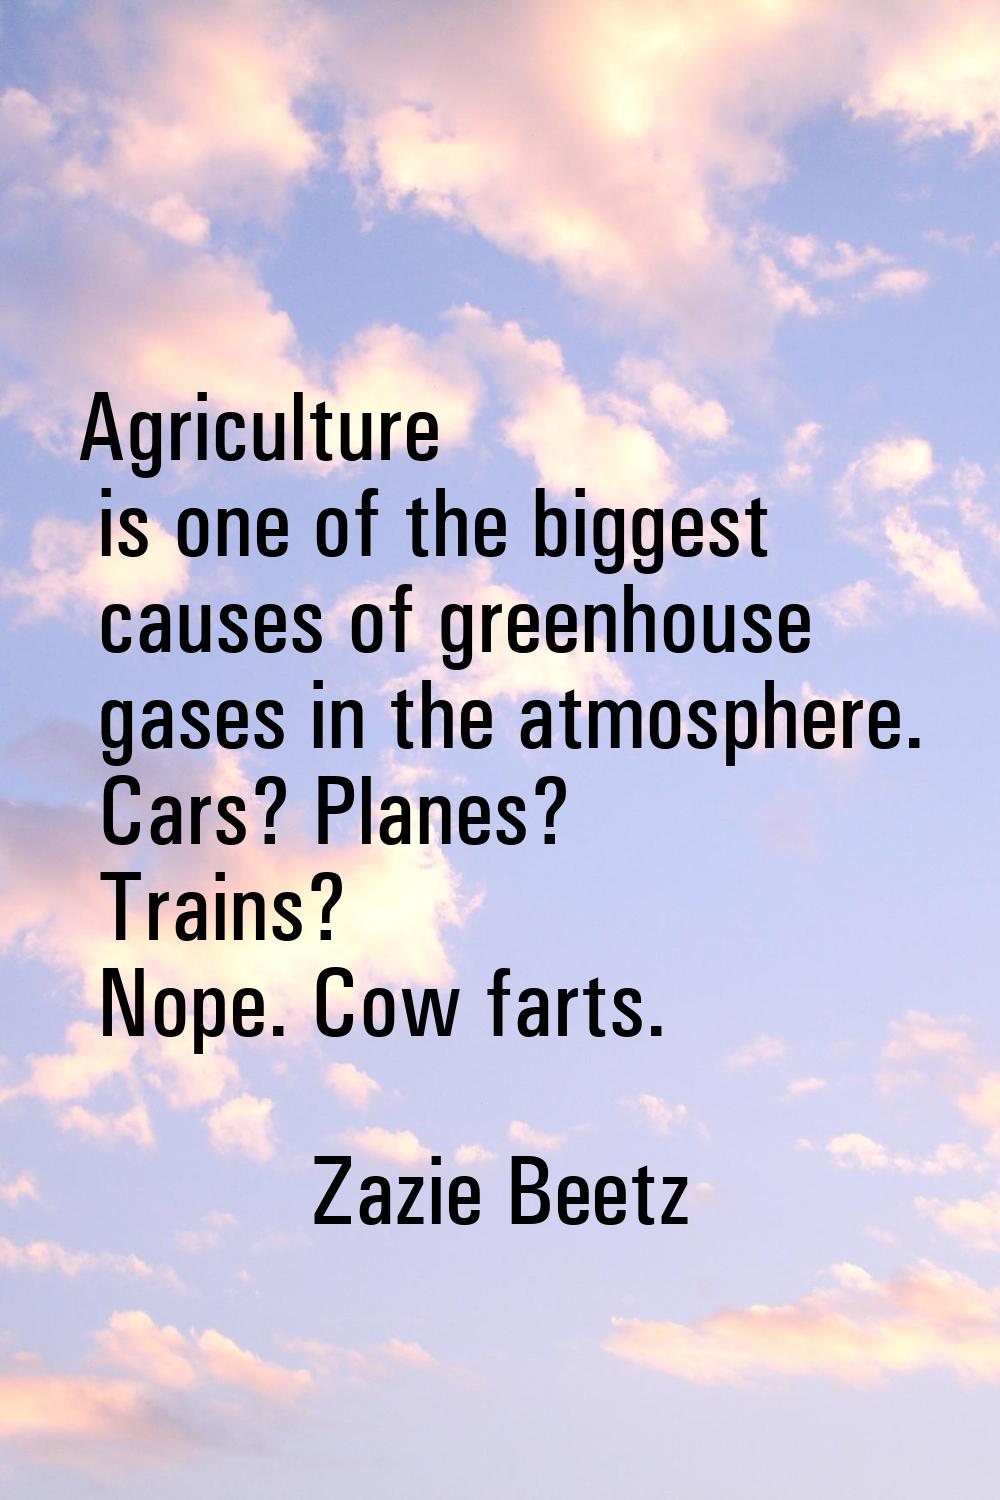 Agriculture is one of the biggest causes of greenhouse gases in the atmosphere. Cars? Planes? Train